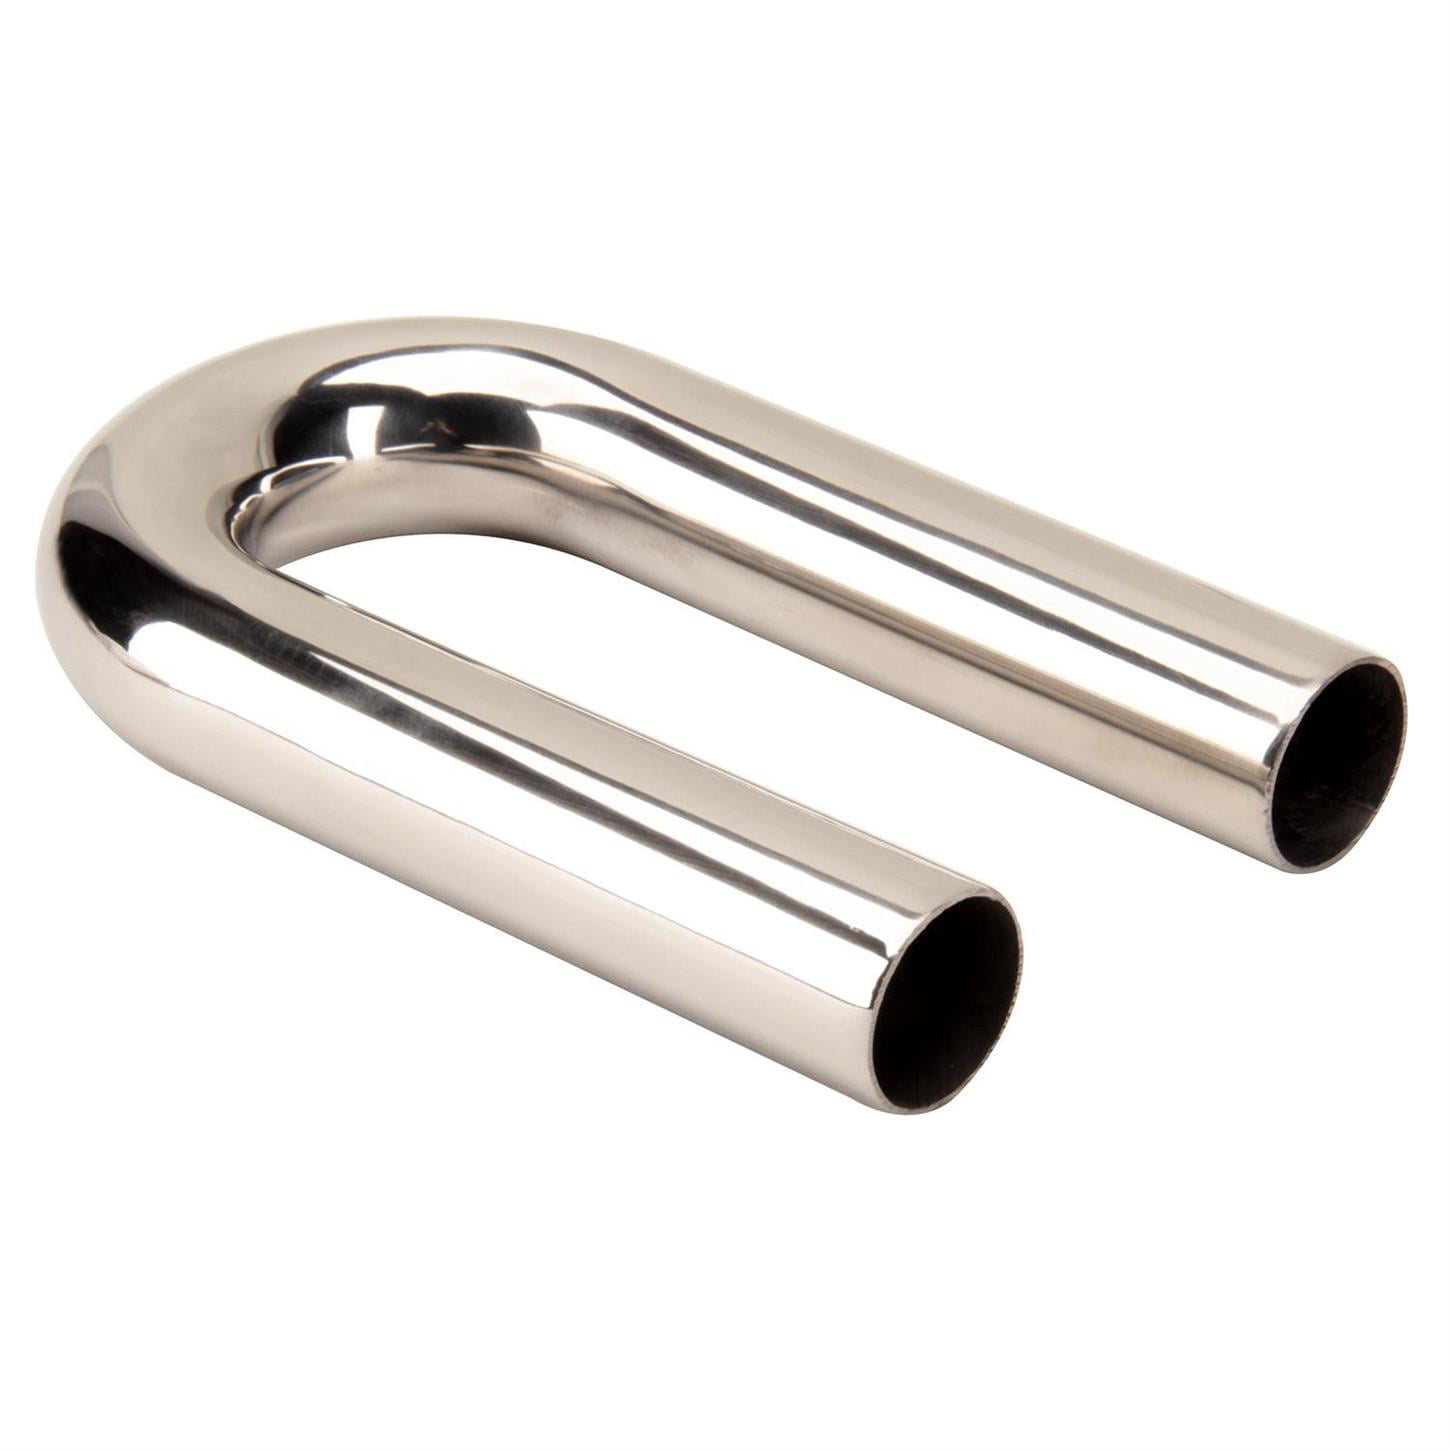 Stainless Steel Mandrel Exhaust Tubing Bends 76mm 3" 15 Degree Angle EEP 